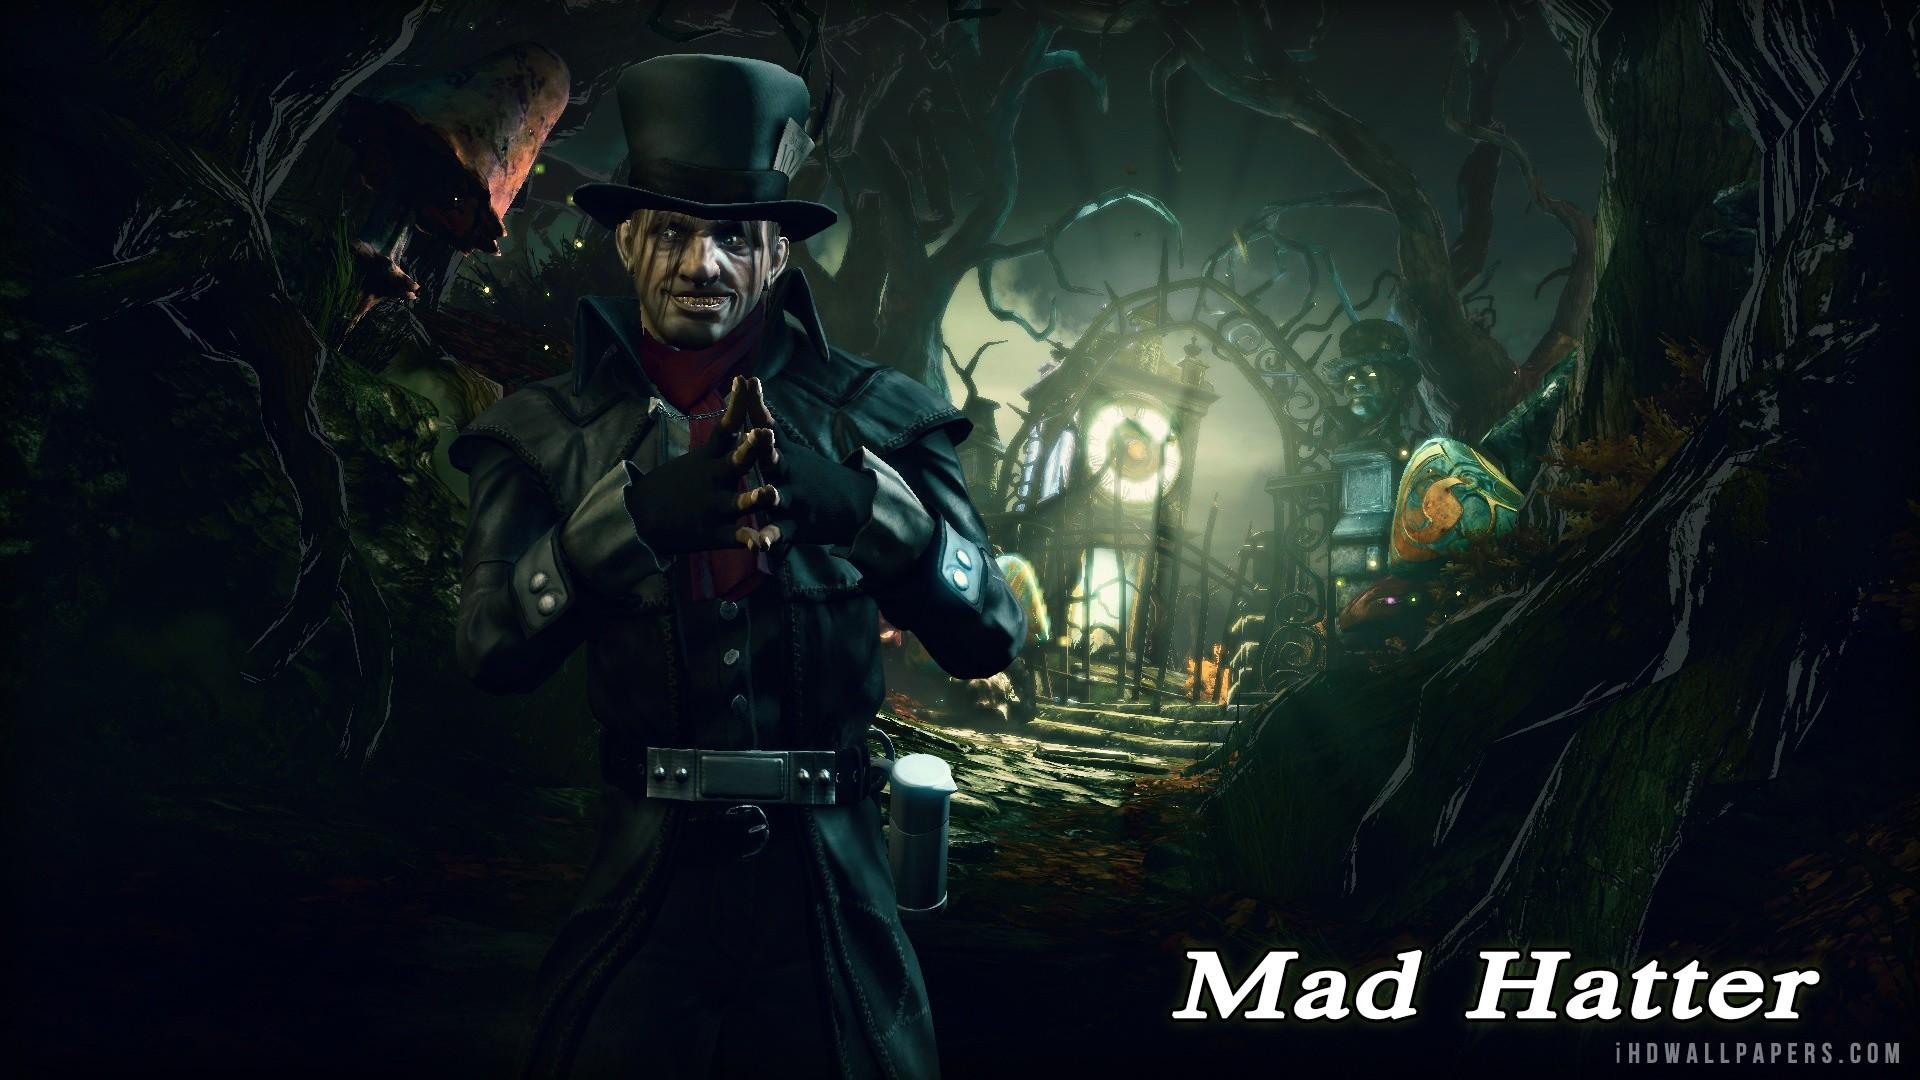 Mad Hatter Desktop Wallpapers Wallpaper Cave Images, Photos, Reviews